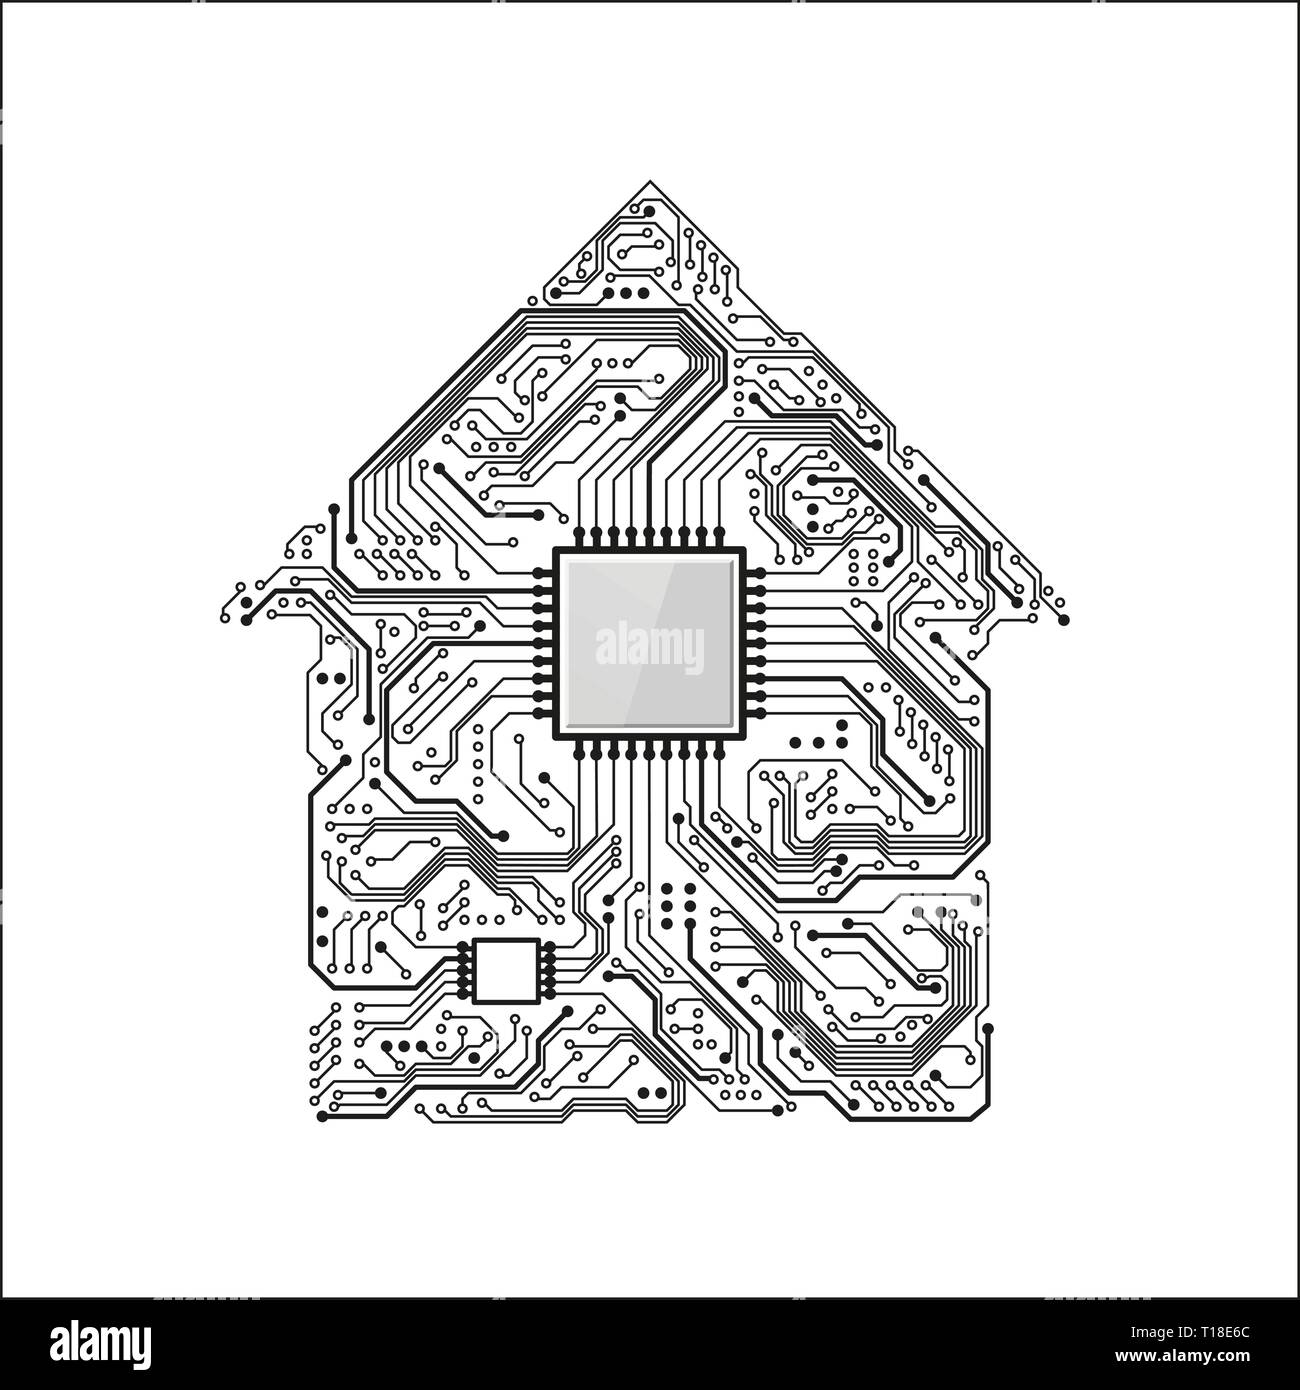 Smart Home Concept. Circuit House with CPU. Future Technology Background. Vector Illustration Stock Vector